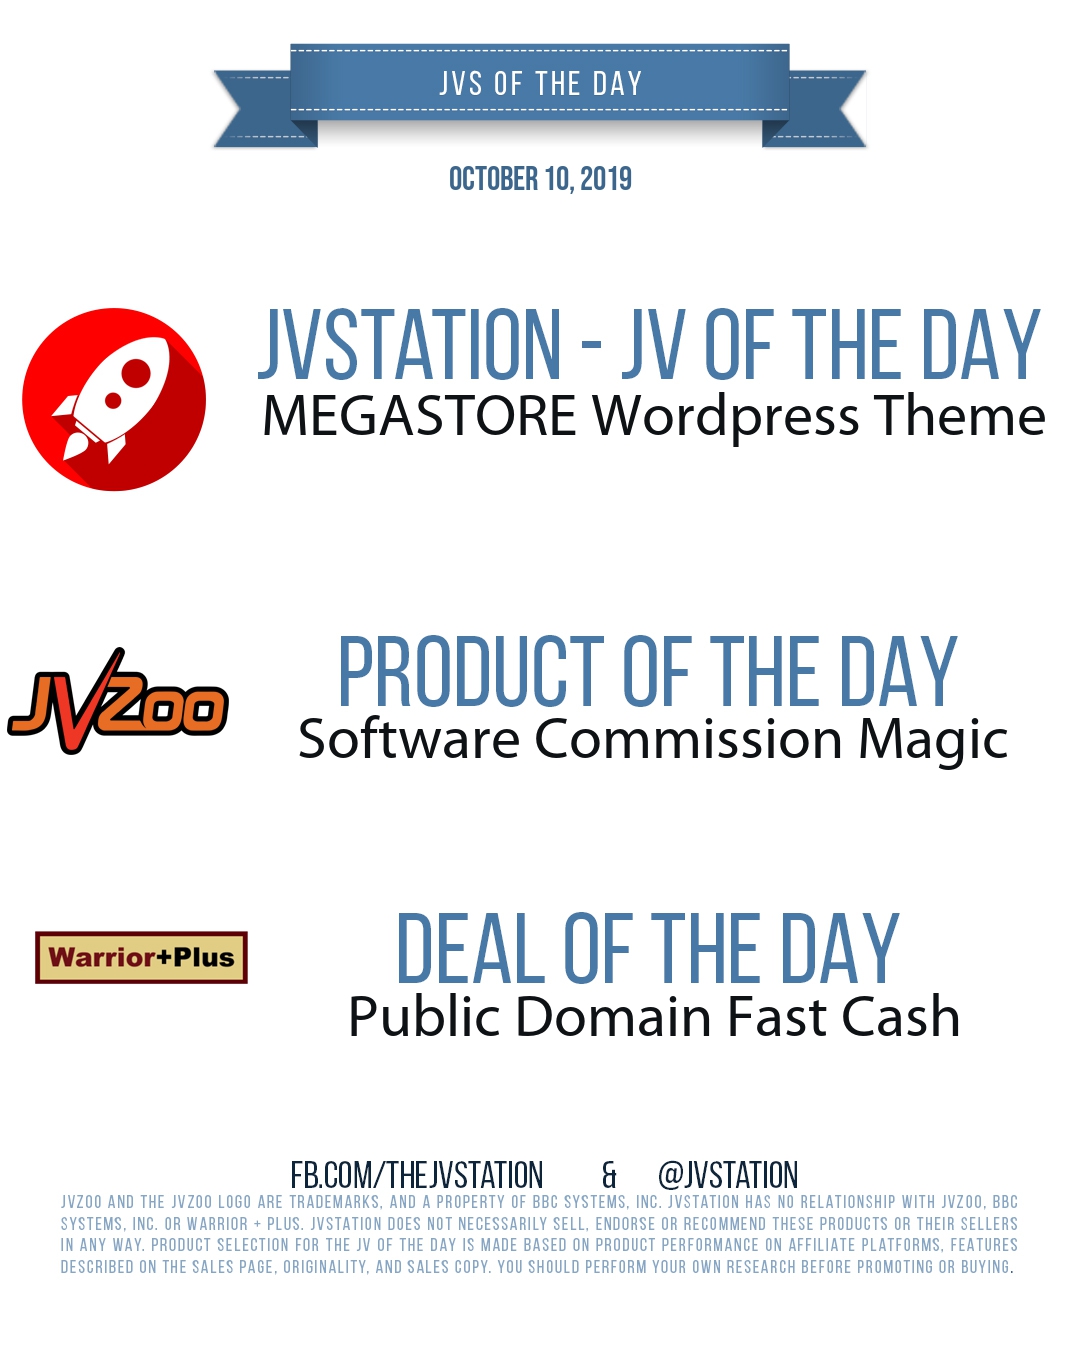 JVs of the day - October 10, 2019